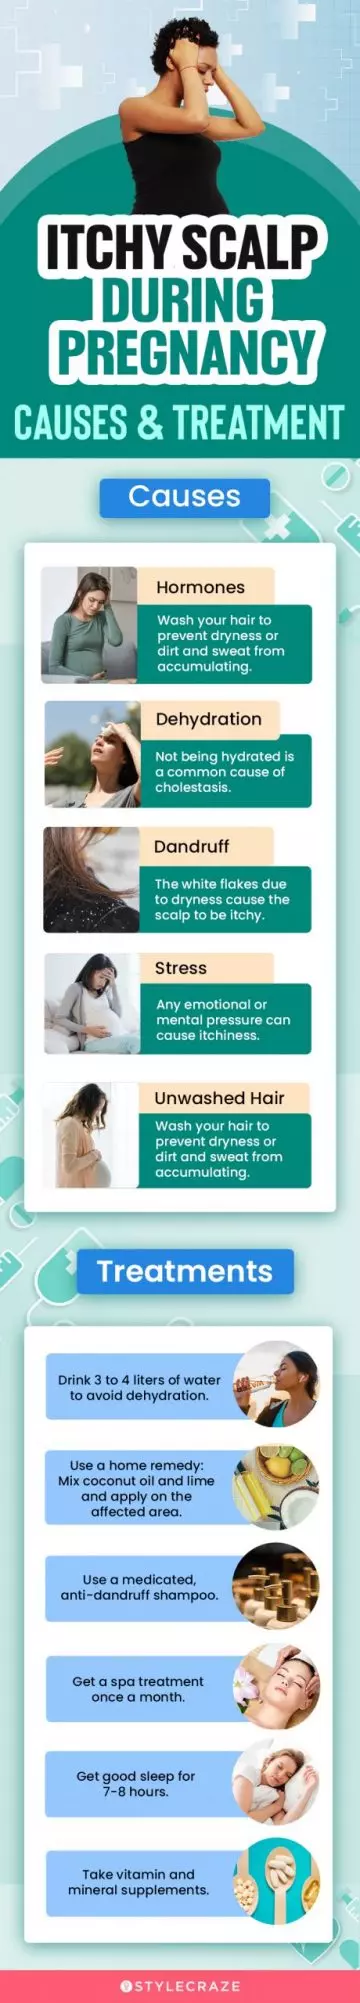 itchy scalp during pregnancy: causes and treatment (infographic)